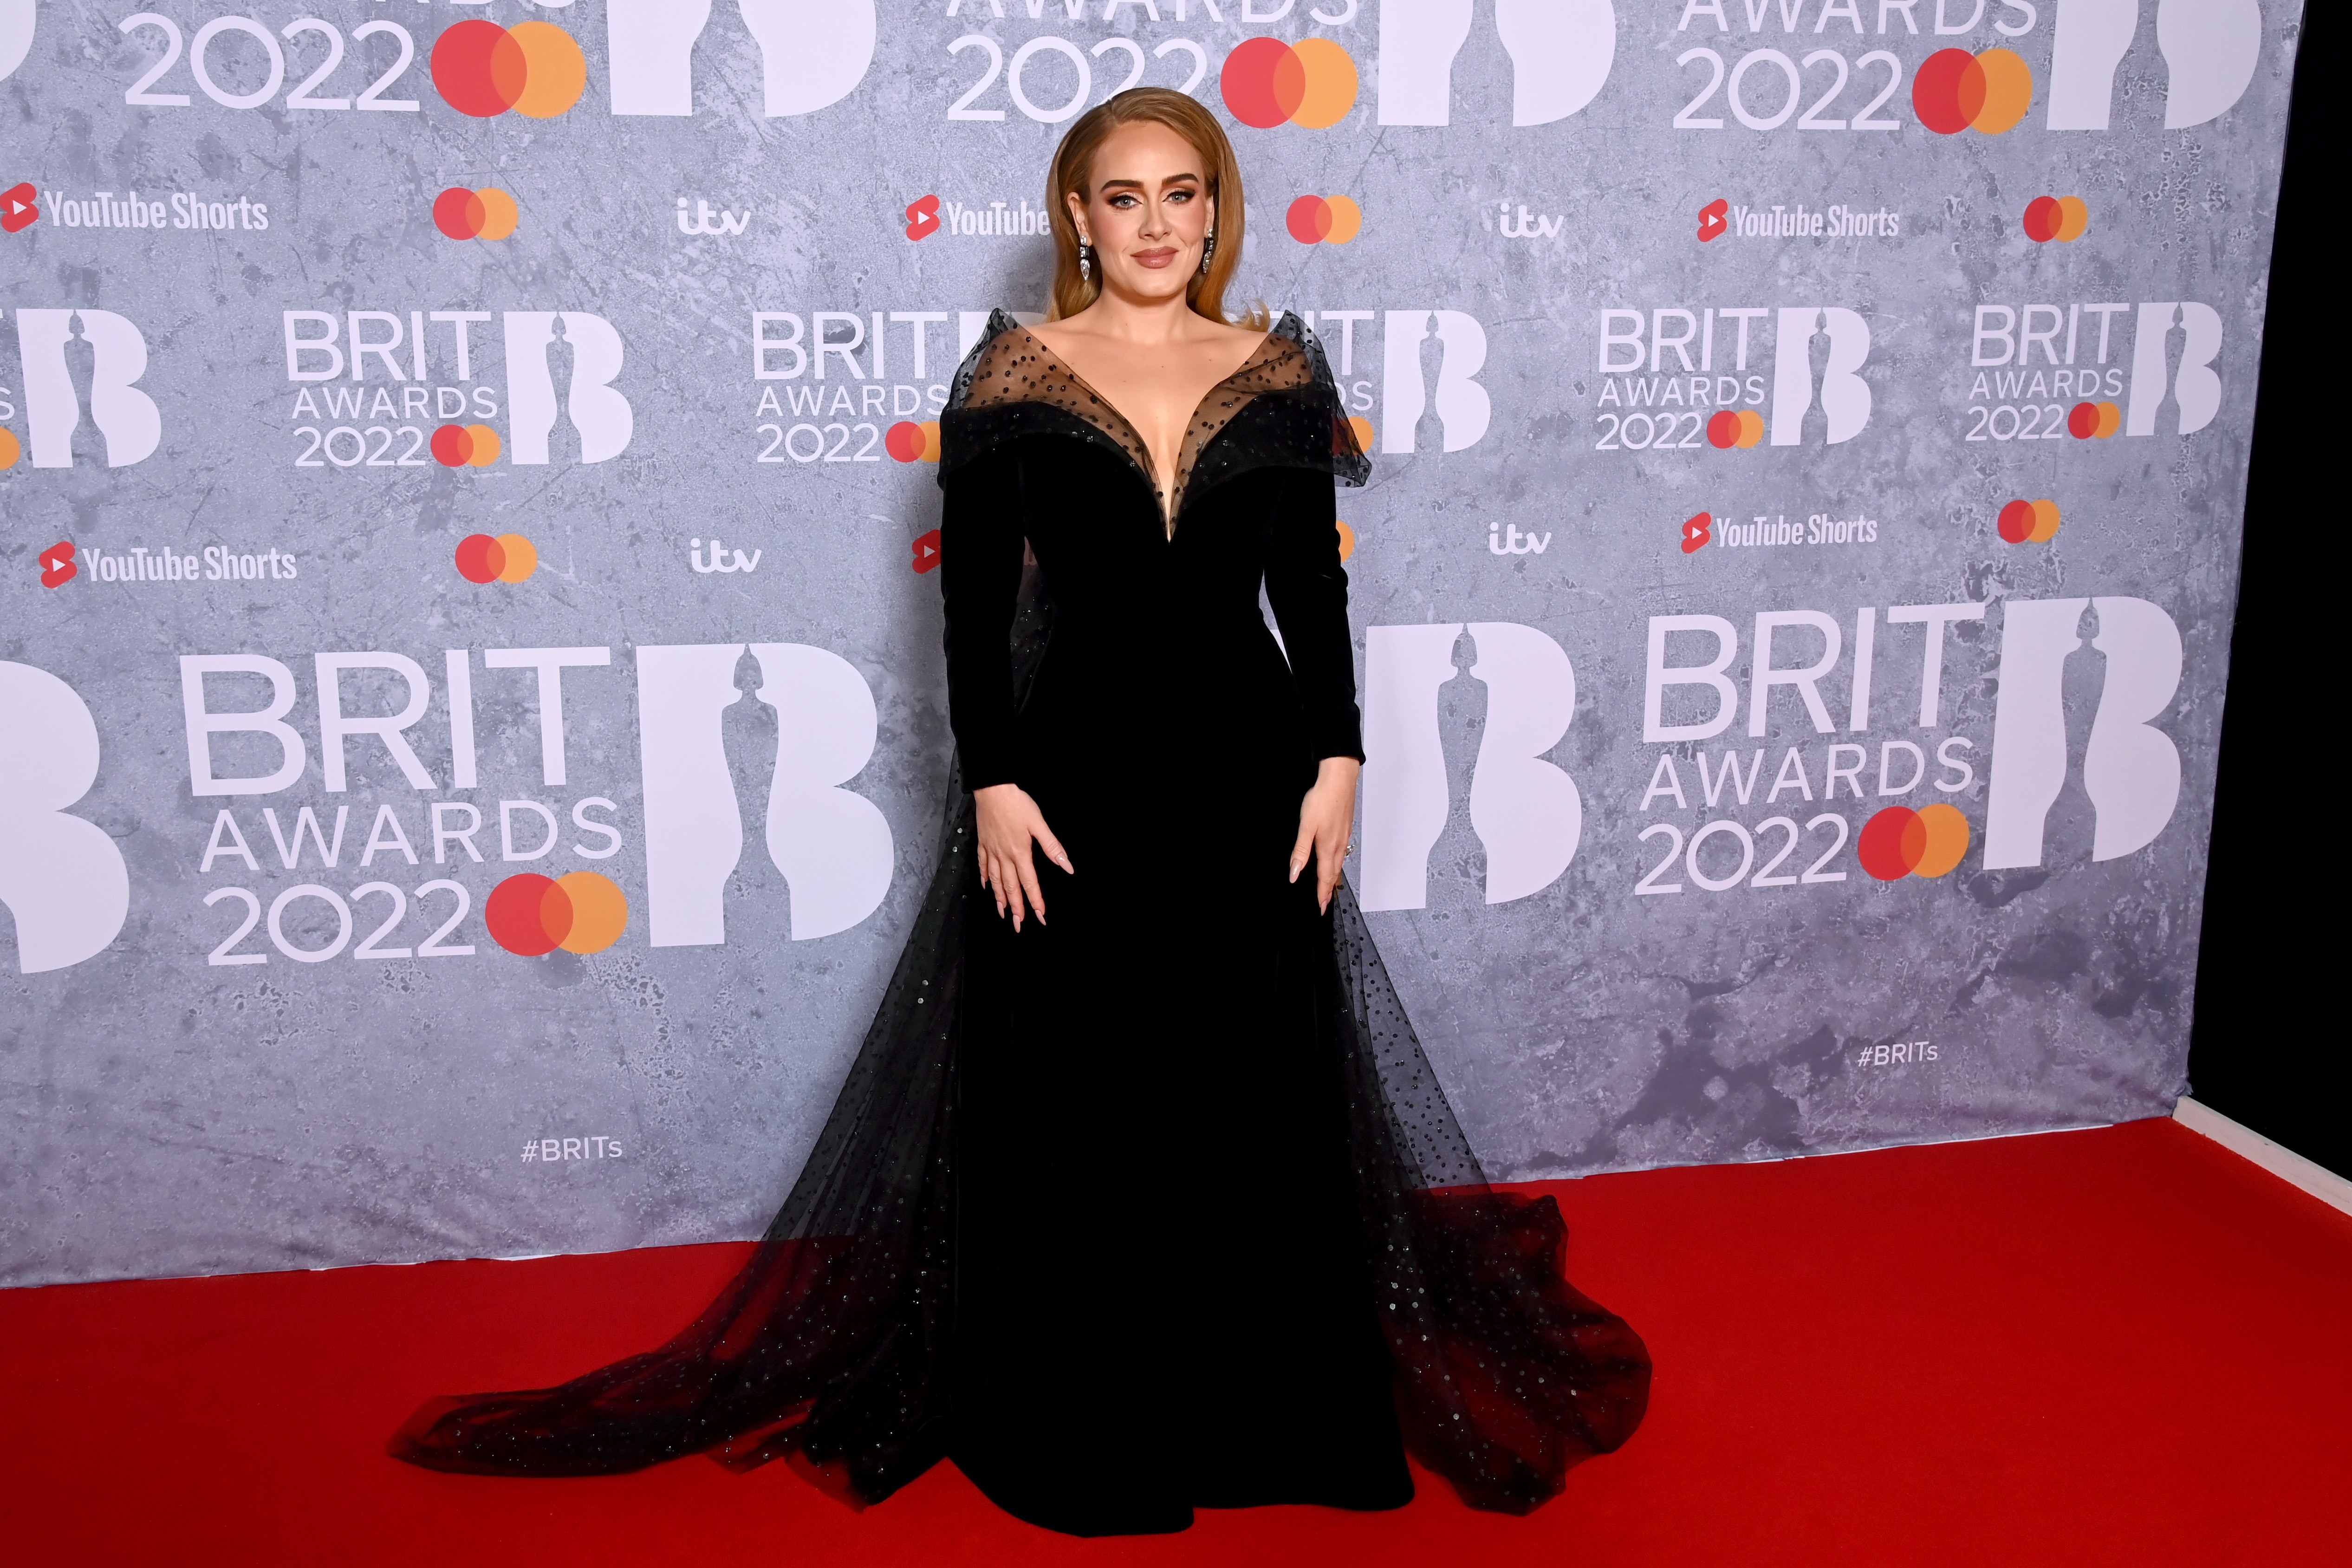 LONDON, ENGLAND - FEBRUARY 08: (EDITORIAL USE ONLY) Adele attends The BRIT Awards 2022 at The O2 Arena on February 08, 2022 in London, England. (Photo by Dave J Hogan/Getty Images for BRIT Awards Limited) (Foto: Dave J Hogan/Getty Images for BR)